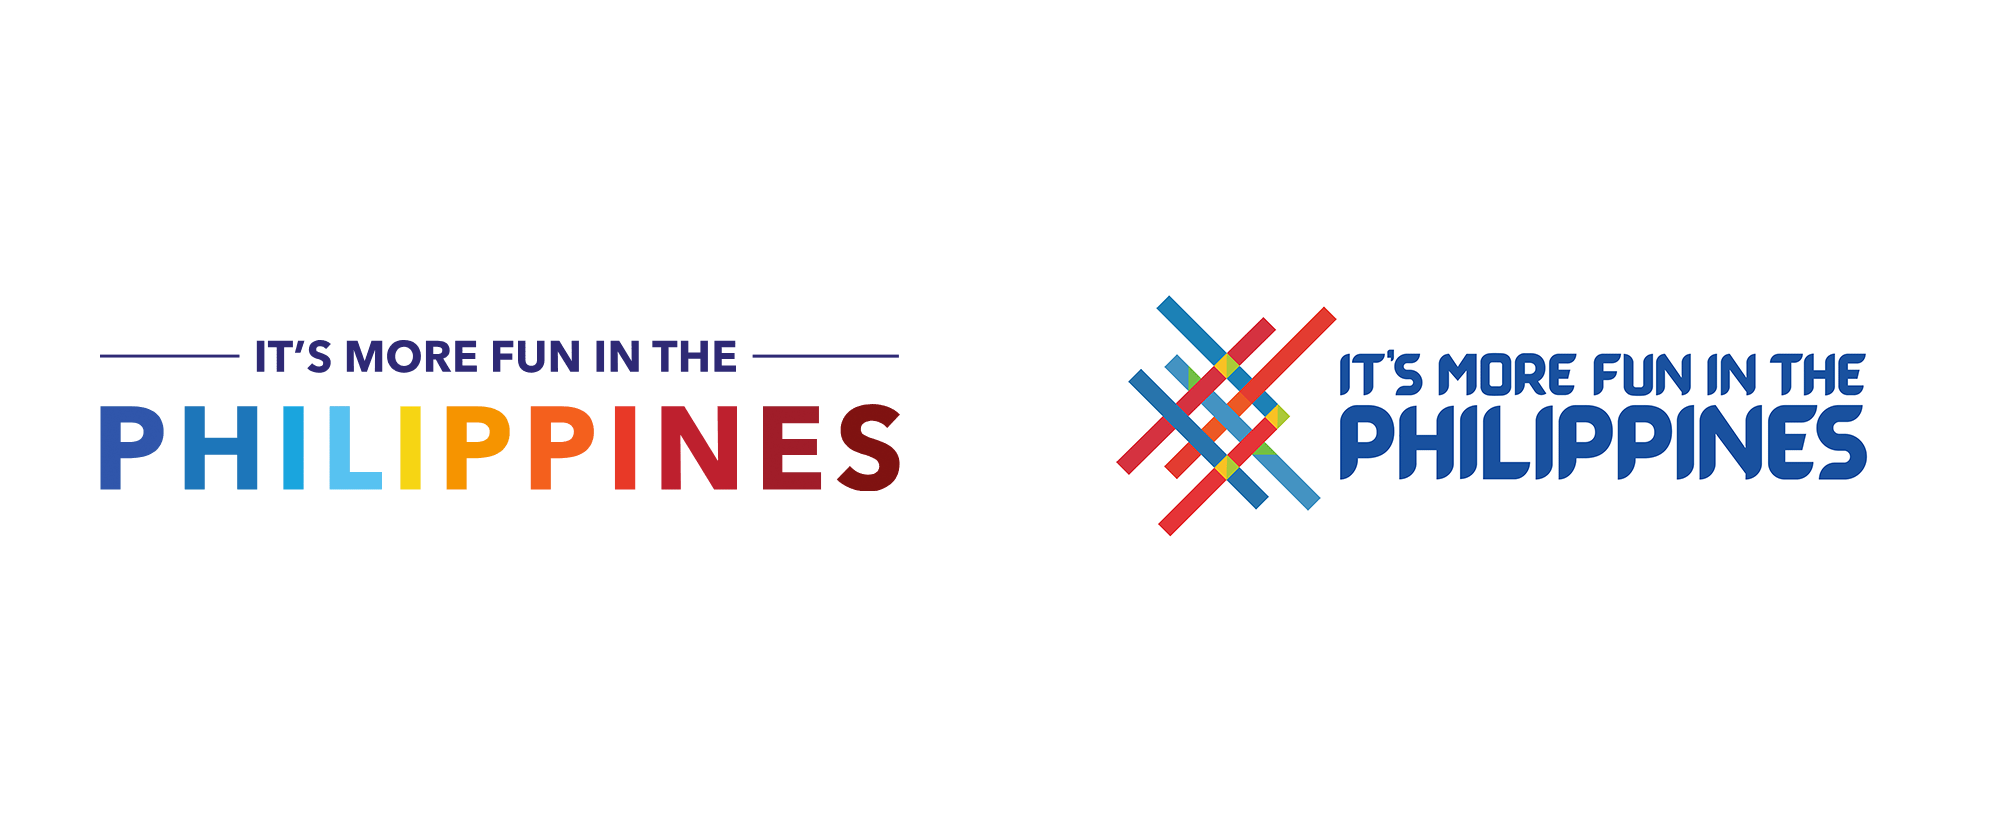 Brand New: New Logo and Font for It’s More Fun in the Philippines by